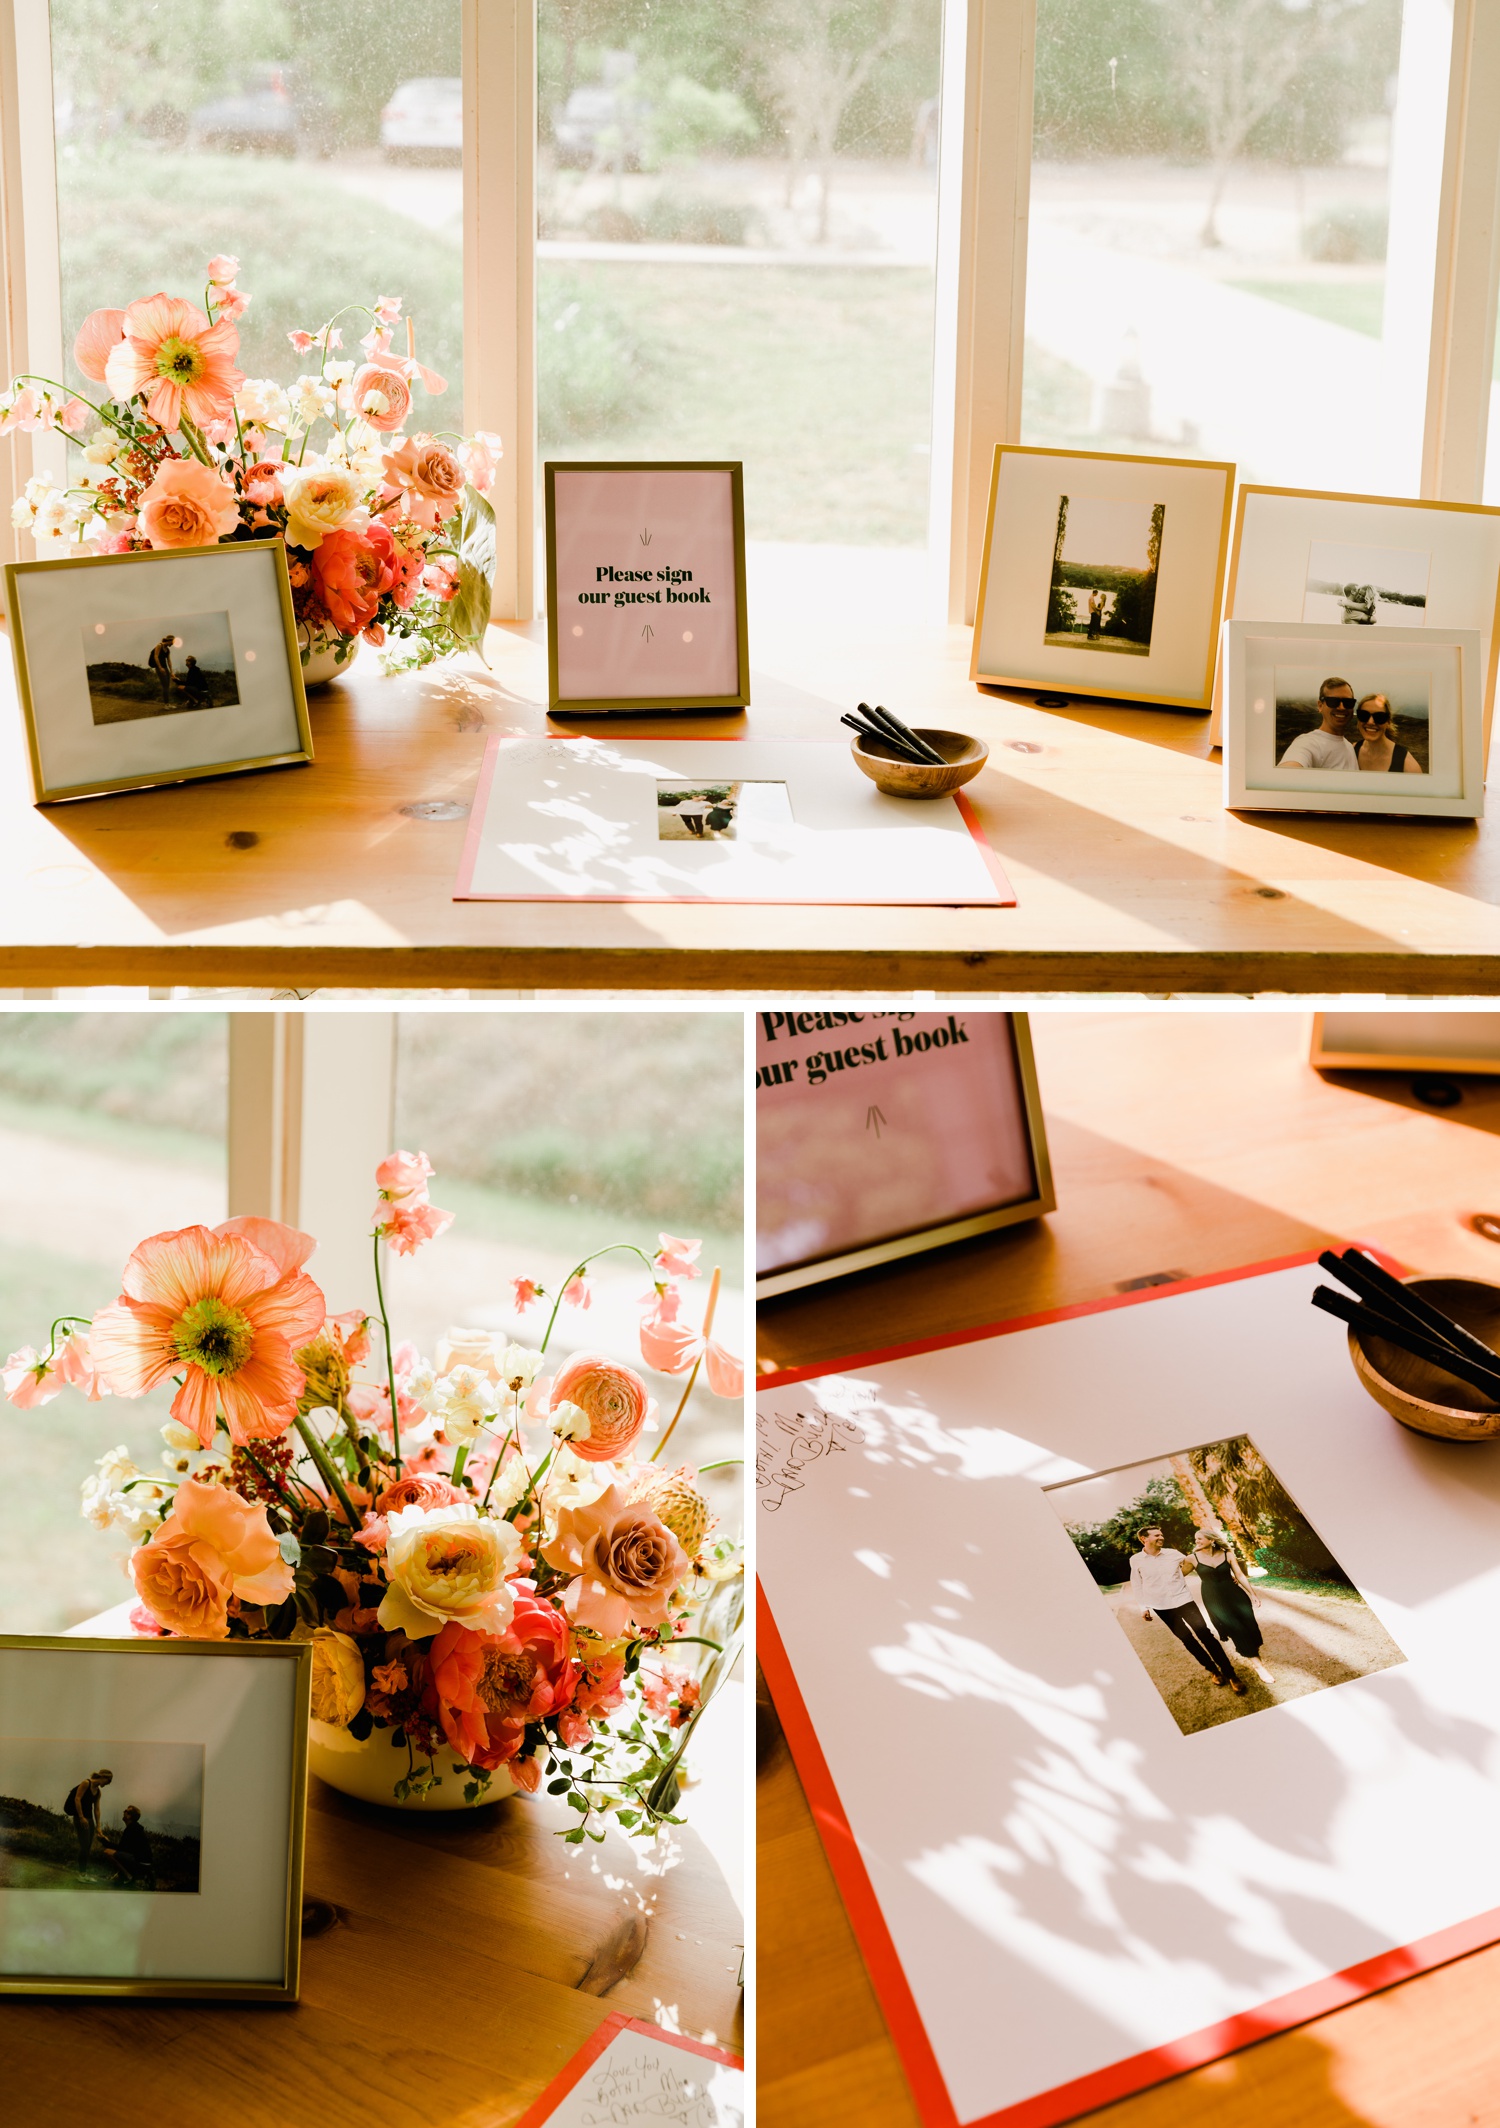 Guest book table with peach florals and framed photos of the bride and groom